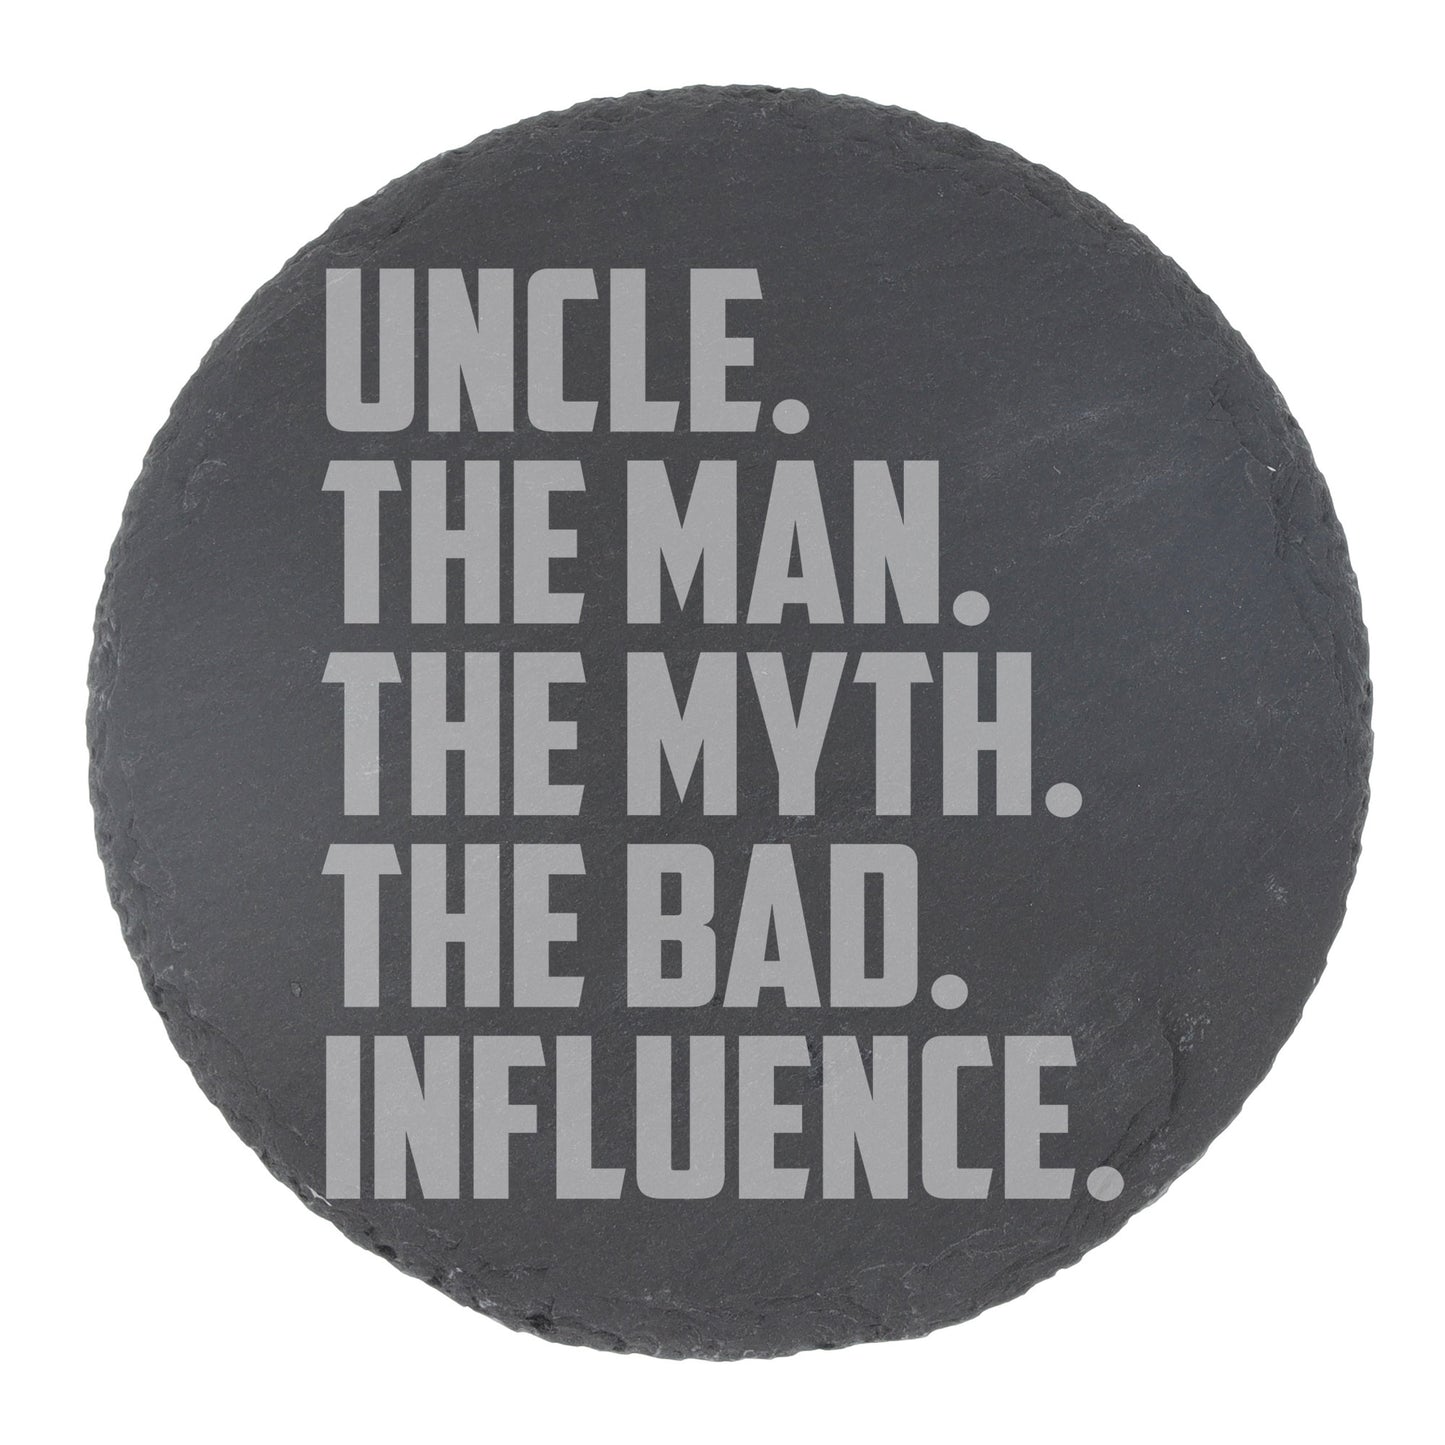 Uncle, The Man, The Myth, The Bad Influence Engraved Wine Glass and/or Coaster Set  - Always Looking Good - Round Coaster Only  